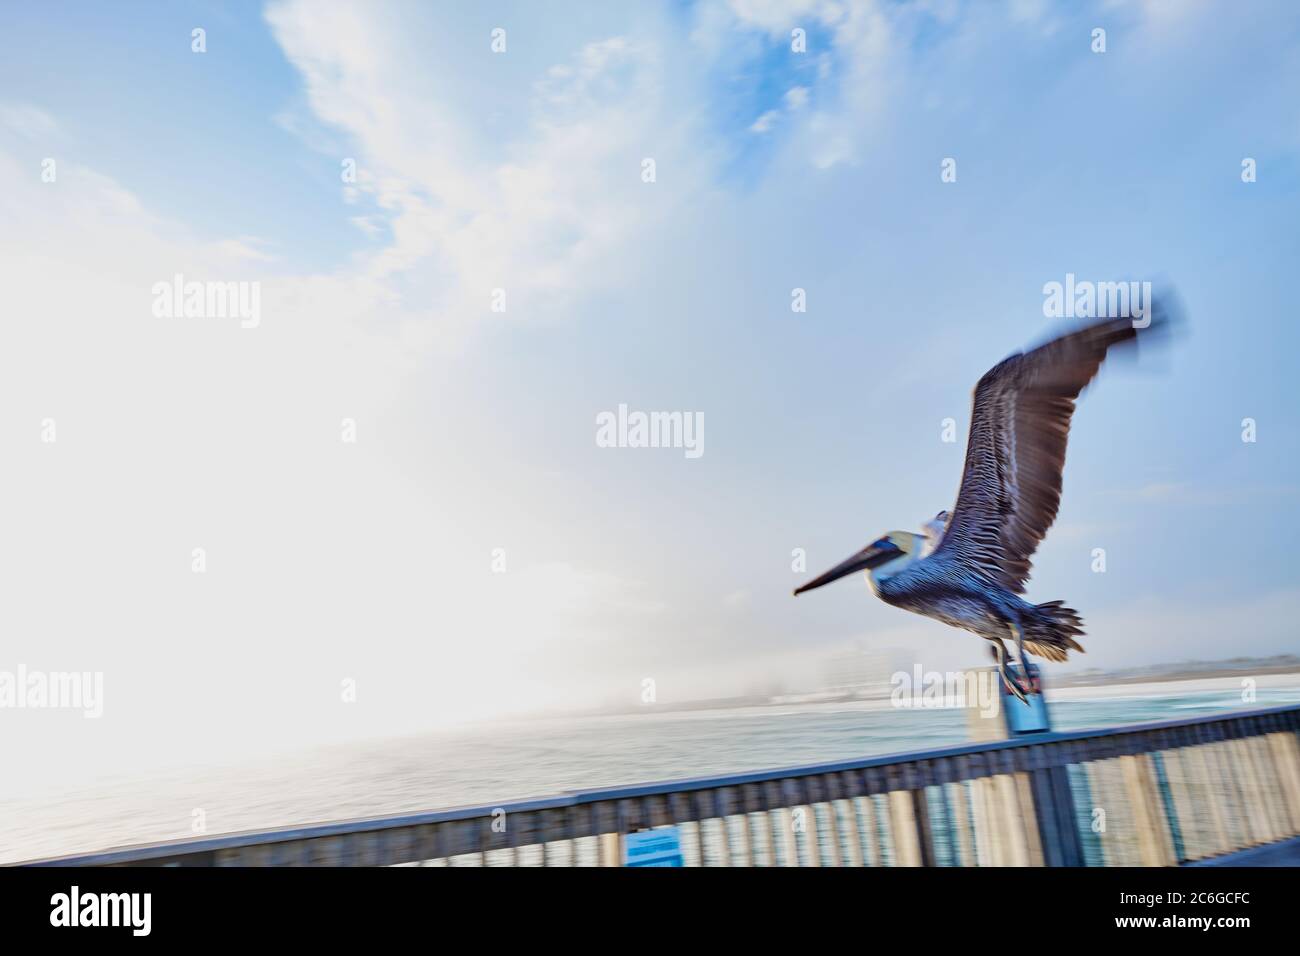 Getting Away From It All! Pelican leaves Pensacola Pier displaying his plumage with wing fully extended.  Motion-blurred. Stock Photo